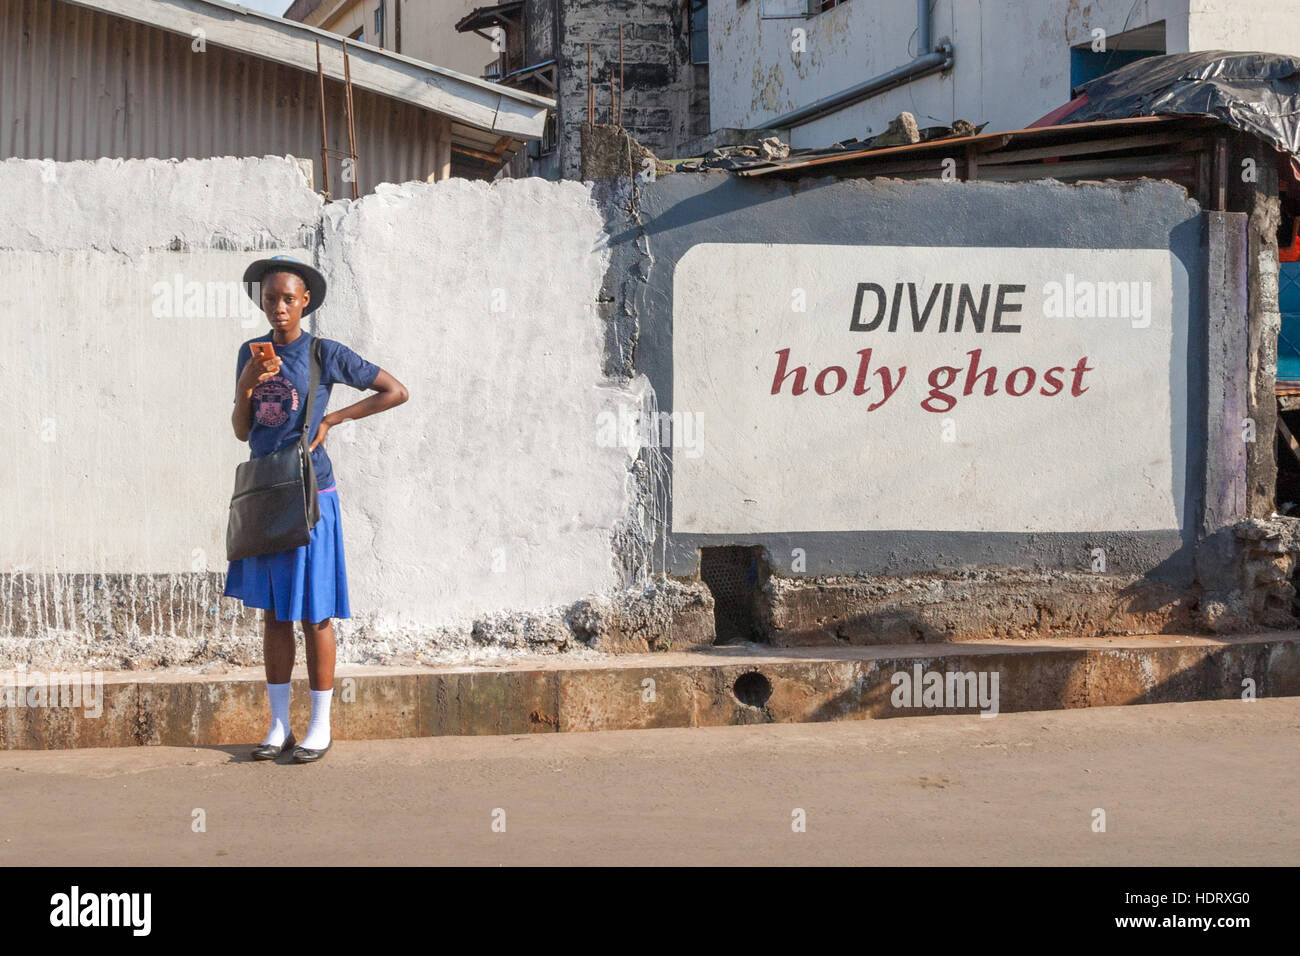 "Divine holy ghost" - Student standing in front of religious inscription in Sierra Leone Stock Photo